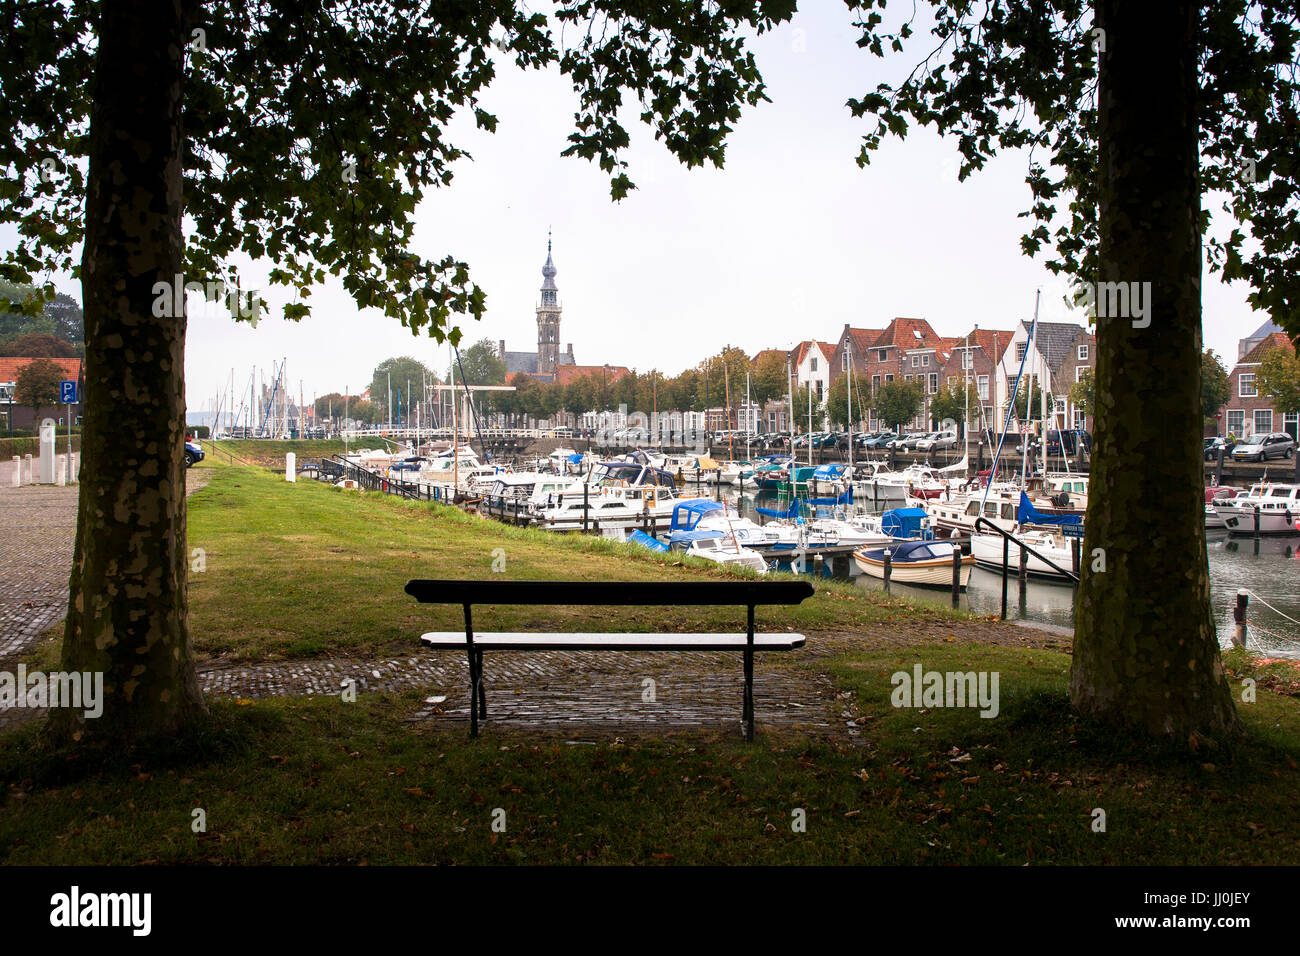 Europe, Netherlands, Zeeland, the village Veere on the peninsula Walcheren, the harbor, in the background the steeple of the town hall. Stock Photo